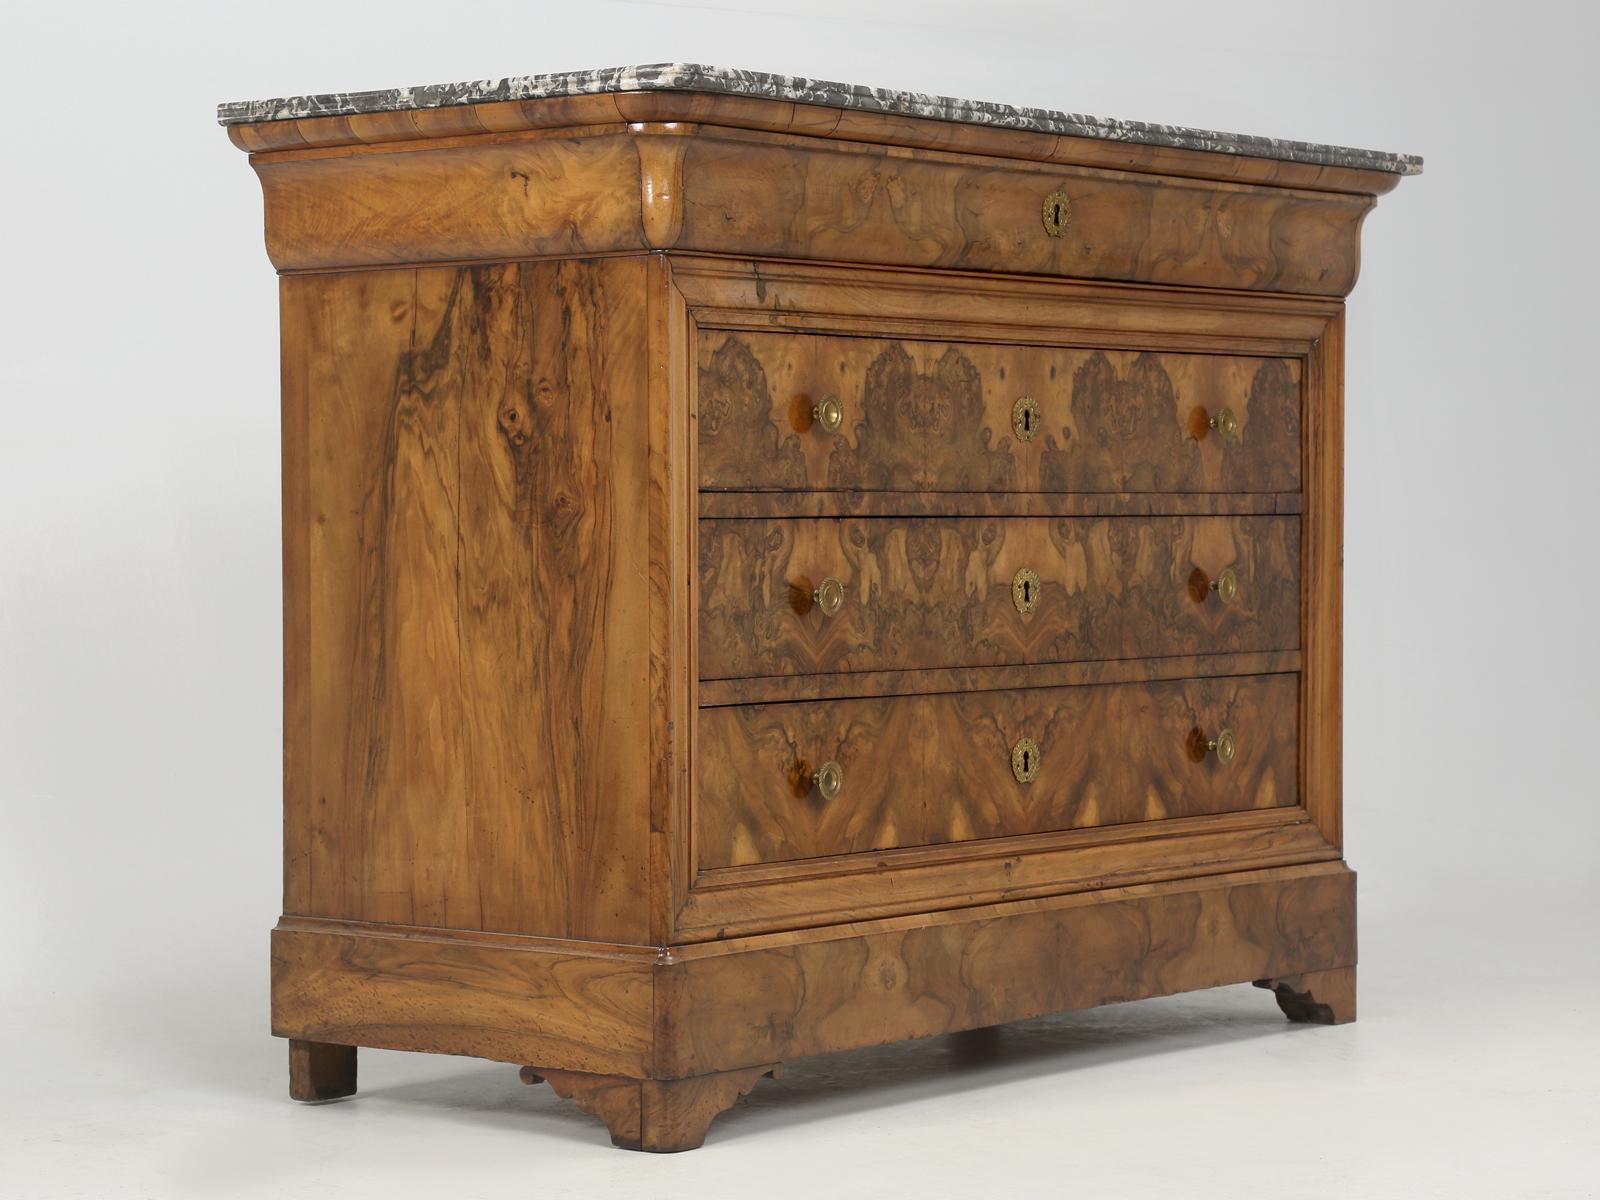 Antique French Louis Philippe chest of drawers or dresser or even commode, since all are appropriate. Our antique French chest was made from beautifully book-matched burl walnut. The marble top is not original to the French commode; however, it is